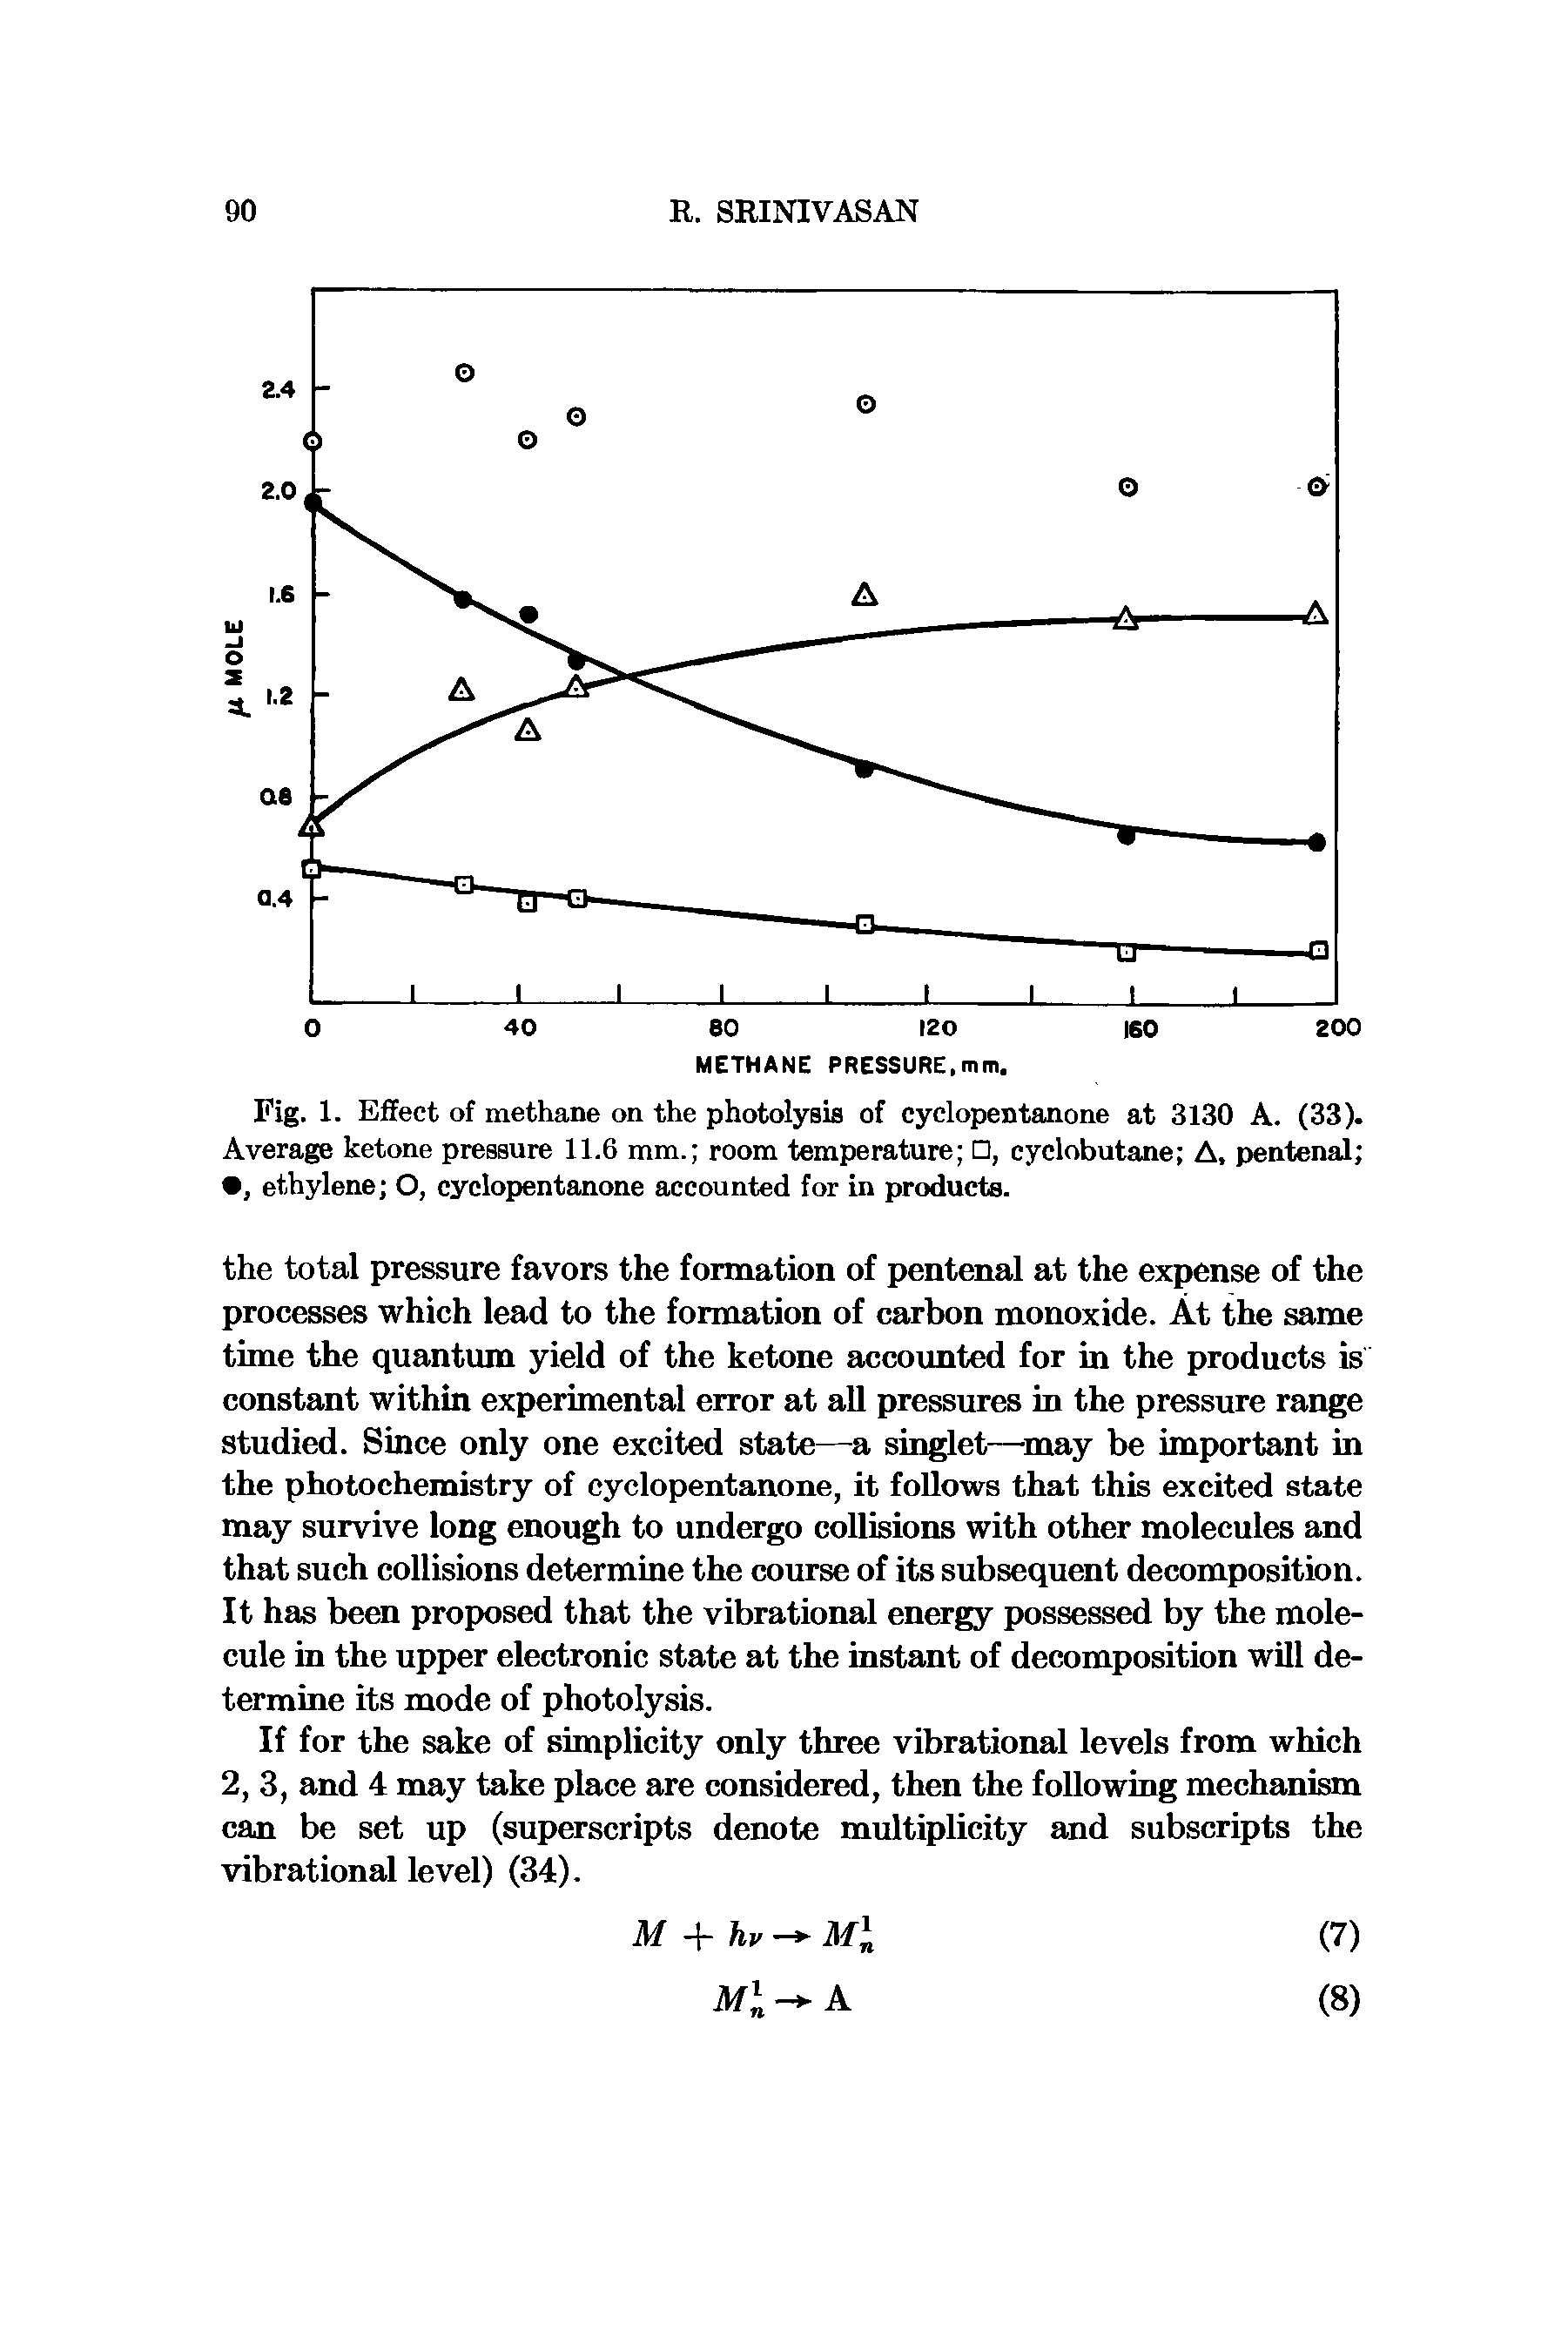 Fig. 1. Effect of methane on the photolysis of cyclopentanone at 3130 A. (33). Average ketone pressure 11.6 mm. room temperature , cyclobutane A, pentenal , ethylene O, cyclopentanone accounted for in products.